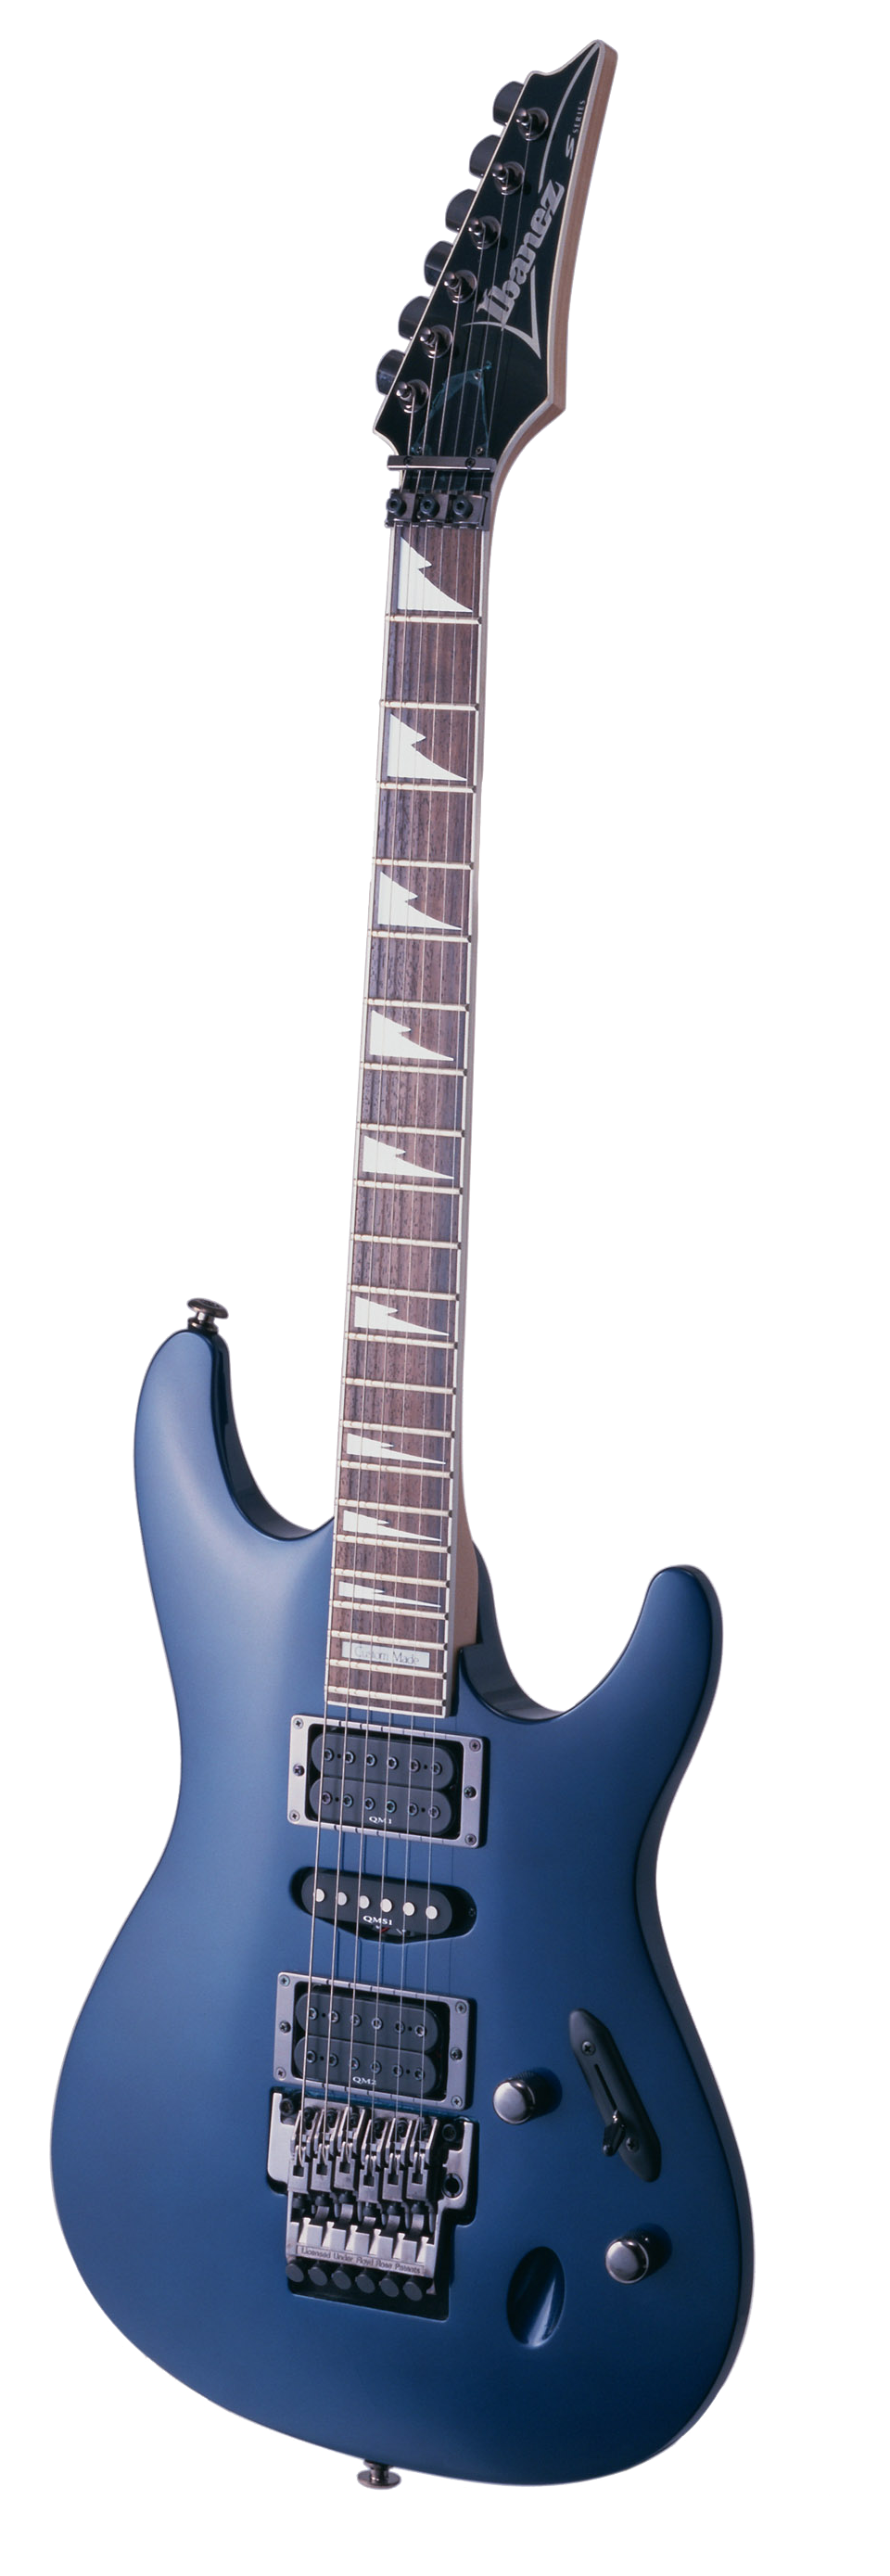 Electric Guitar Blue PNG Image